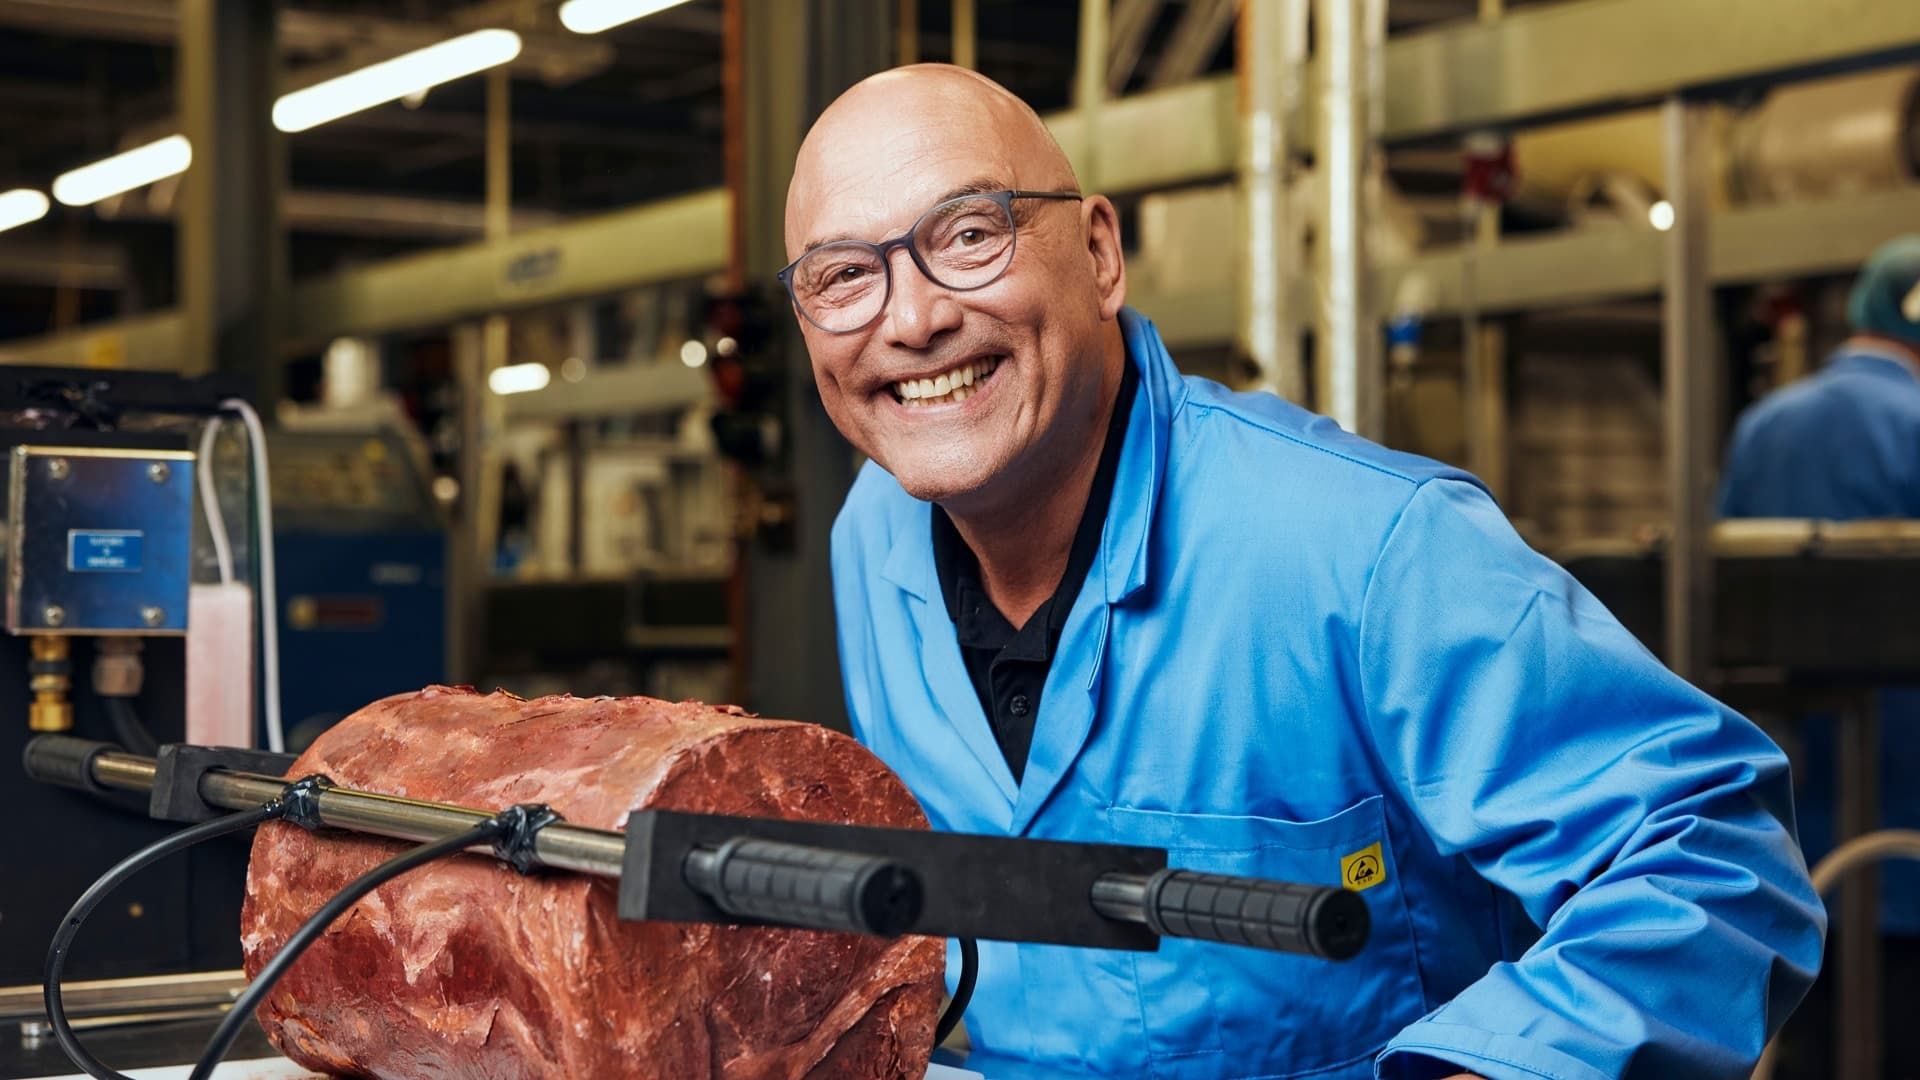 Gregg Wallace: The British Miracle Meat background